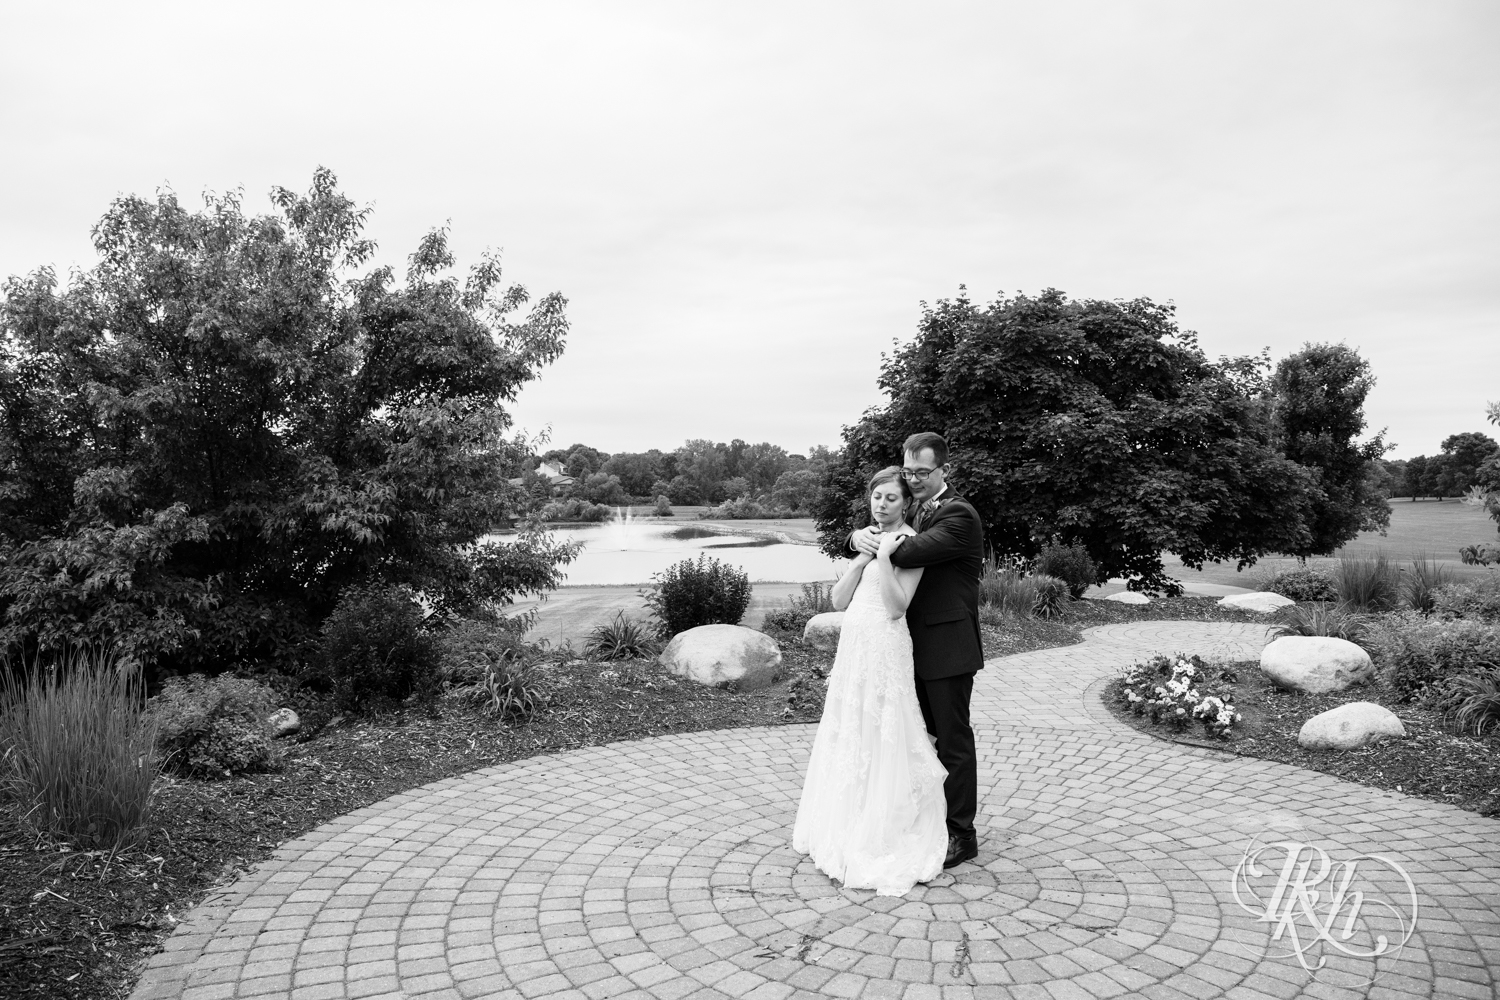 Bride and groom kiss after wedding ceremony at Oak Glen Golf Course in Stillwater, Minnesota.